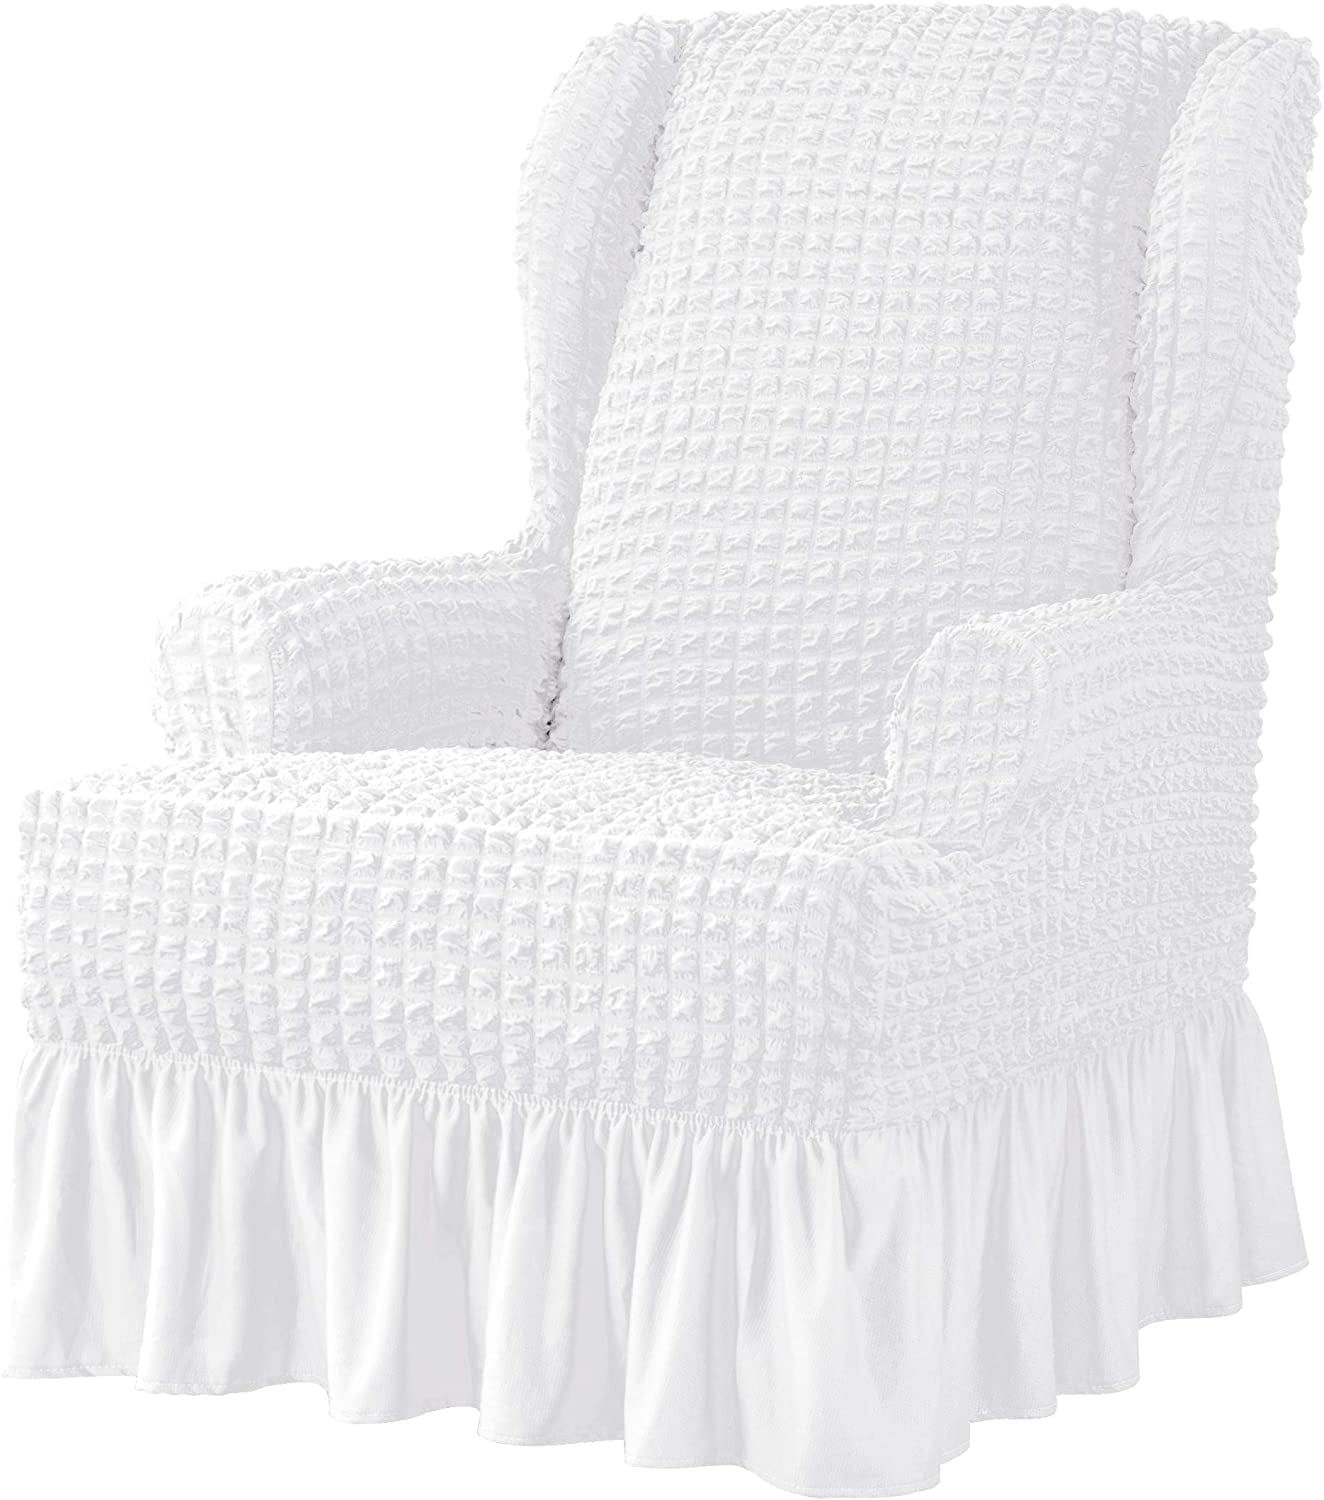 Subrtex Ruffle Furniture Stretch Wing Chair Cover Skirt Wingback Slipcover 1 Pc 